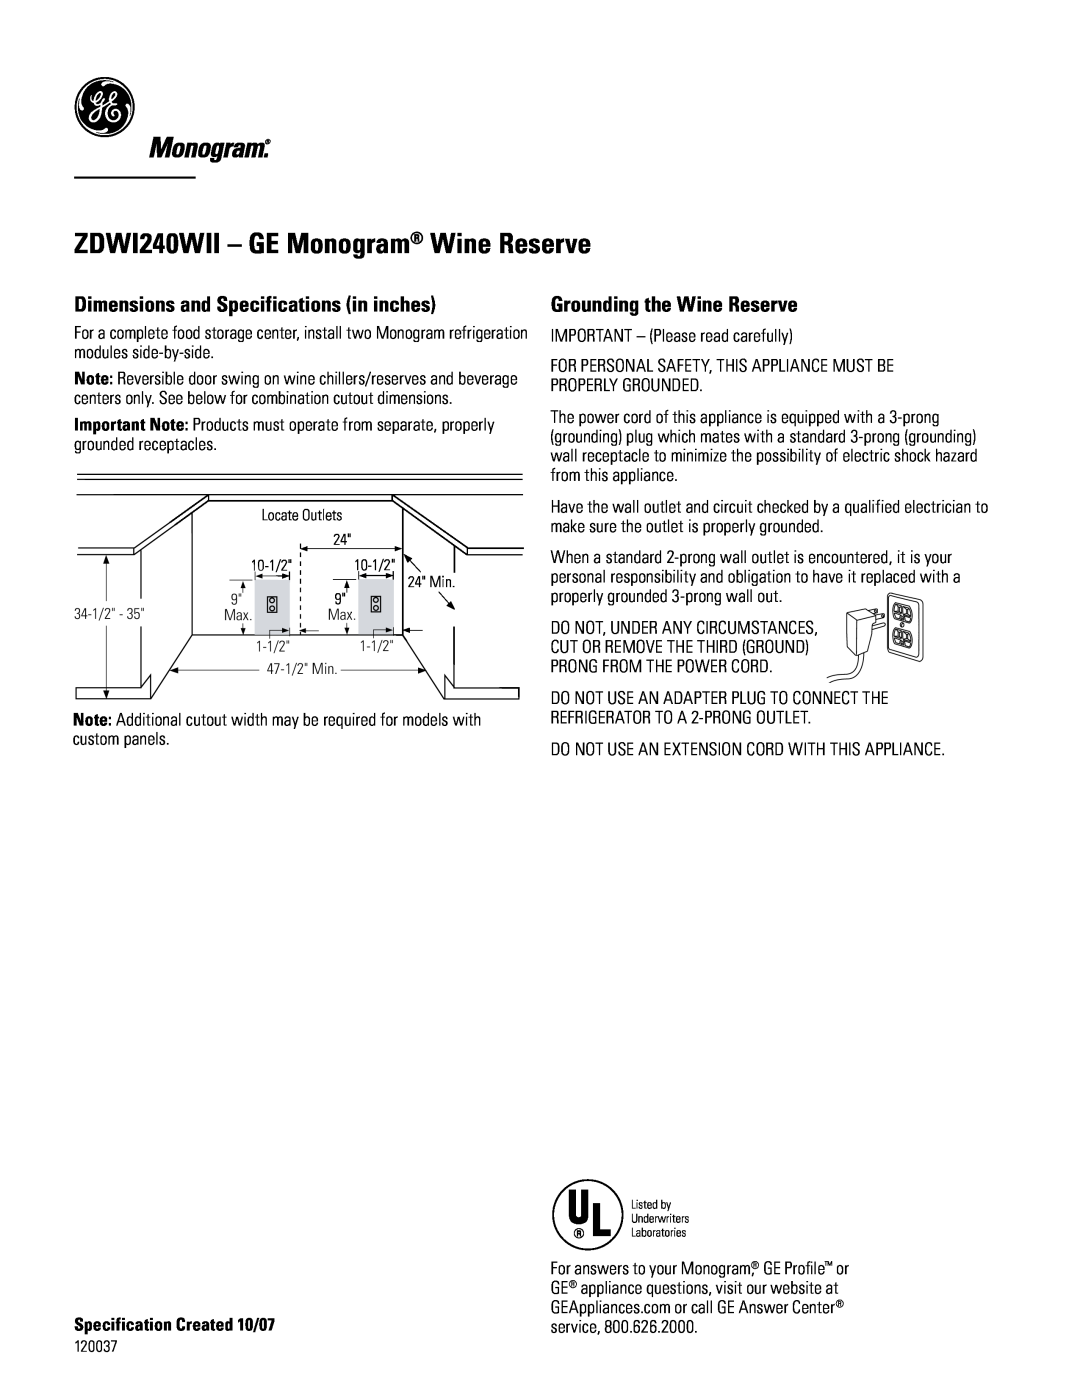 GE dimensions Dimensions and Specifications in inches, Grounding the Wine Reserve, ZDWI240WII - GE Monogram Wine Reserve 